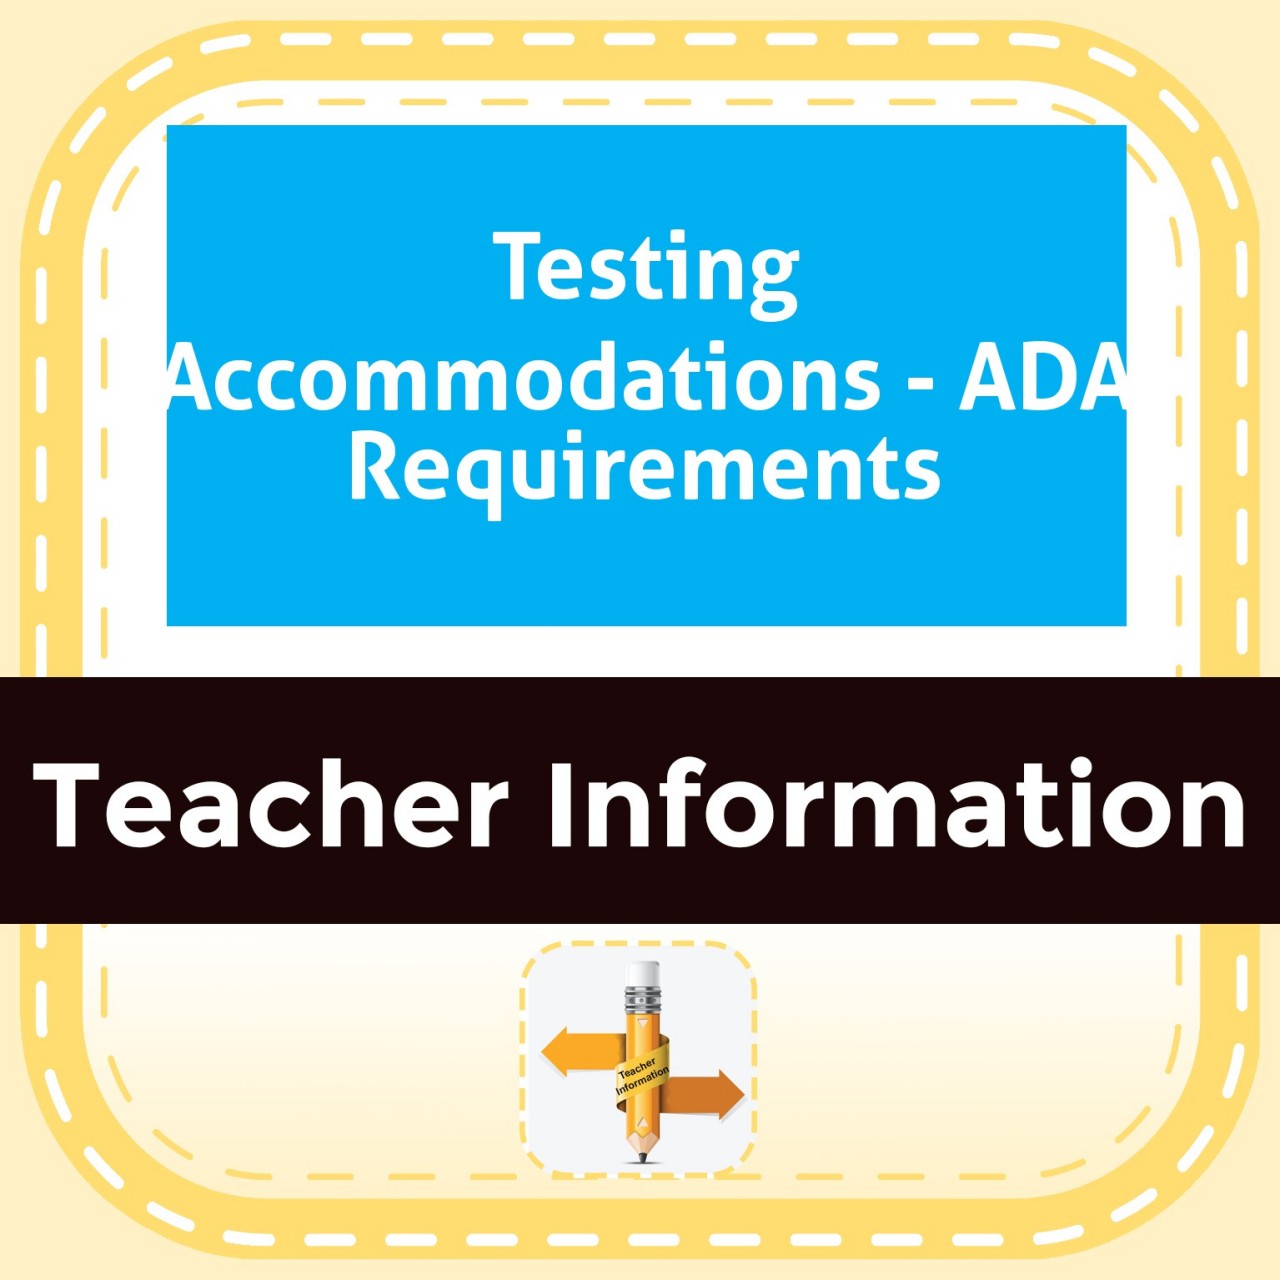 Testing Accommodations - ADA Requirements